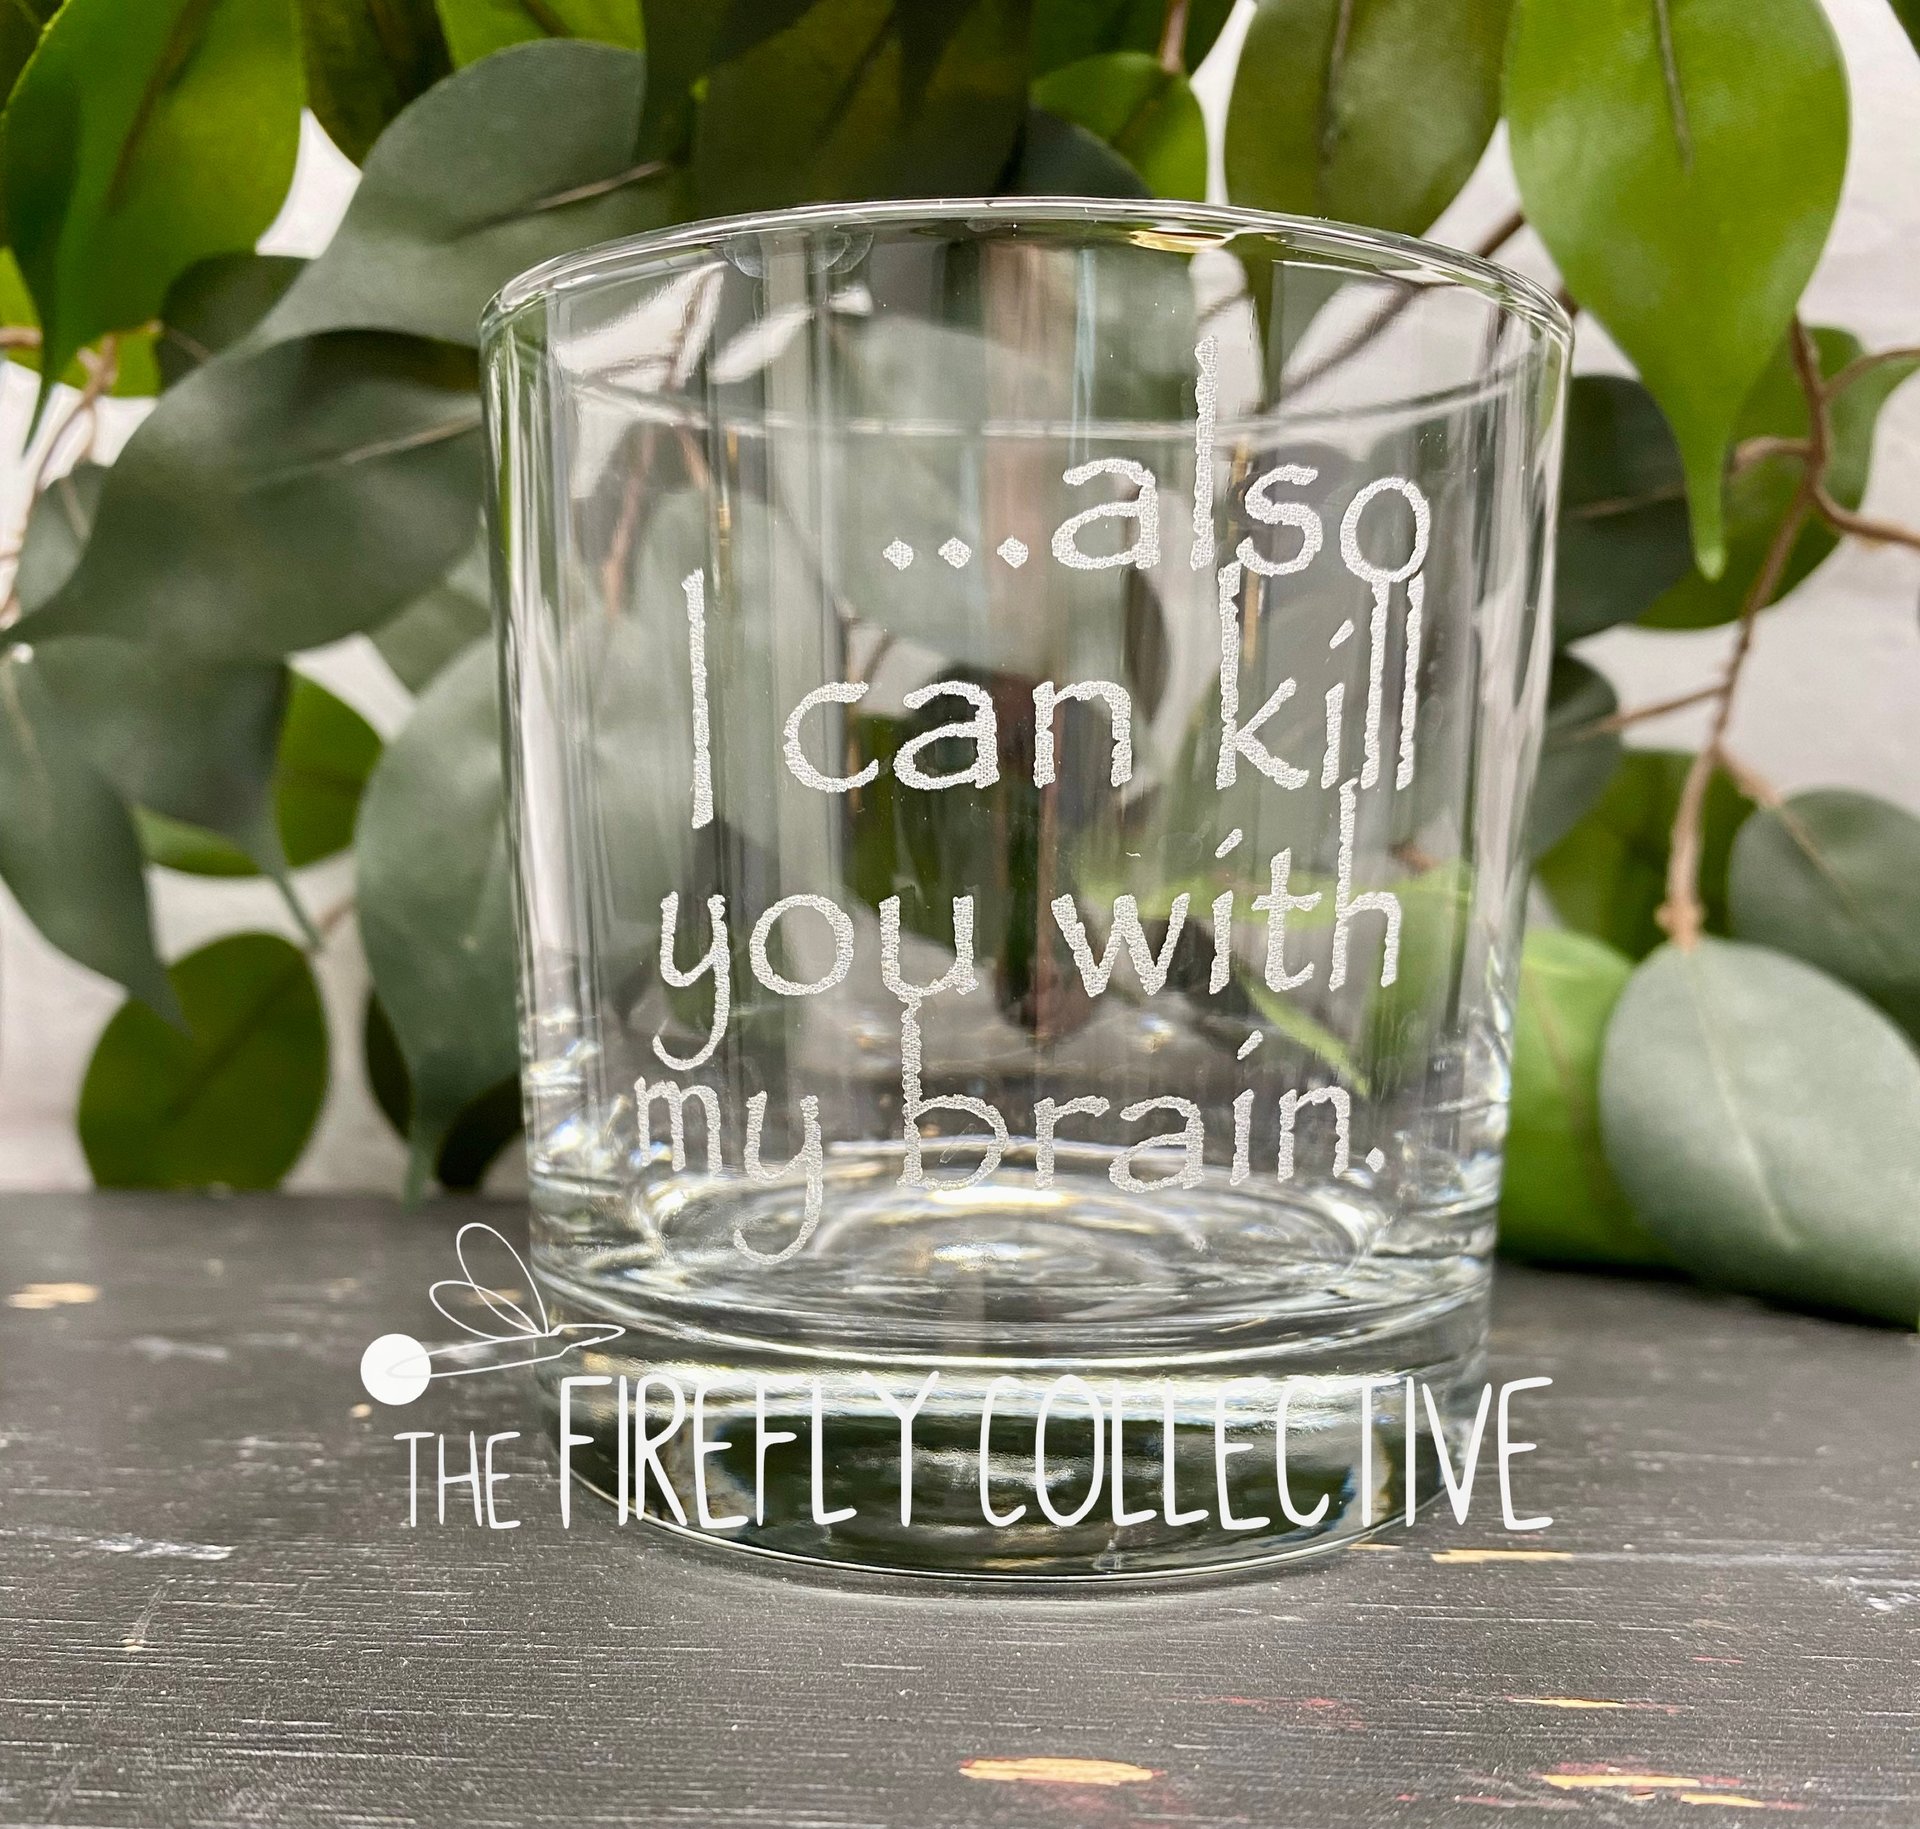 Quick Ship - I Can Kill You with My Brain Firefly Serenity Inspired 10 oz Old Fashion/ Whiskey/ Rocks Glass - Browncoat, River Tam, SciFi